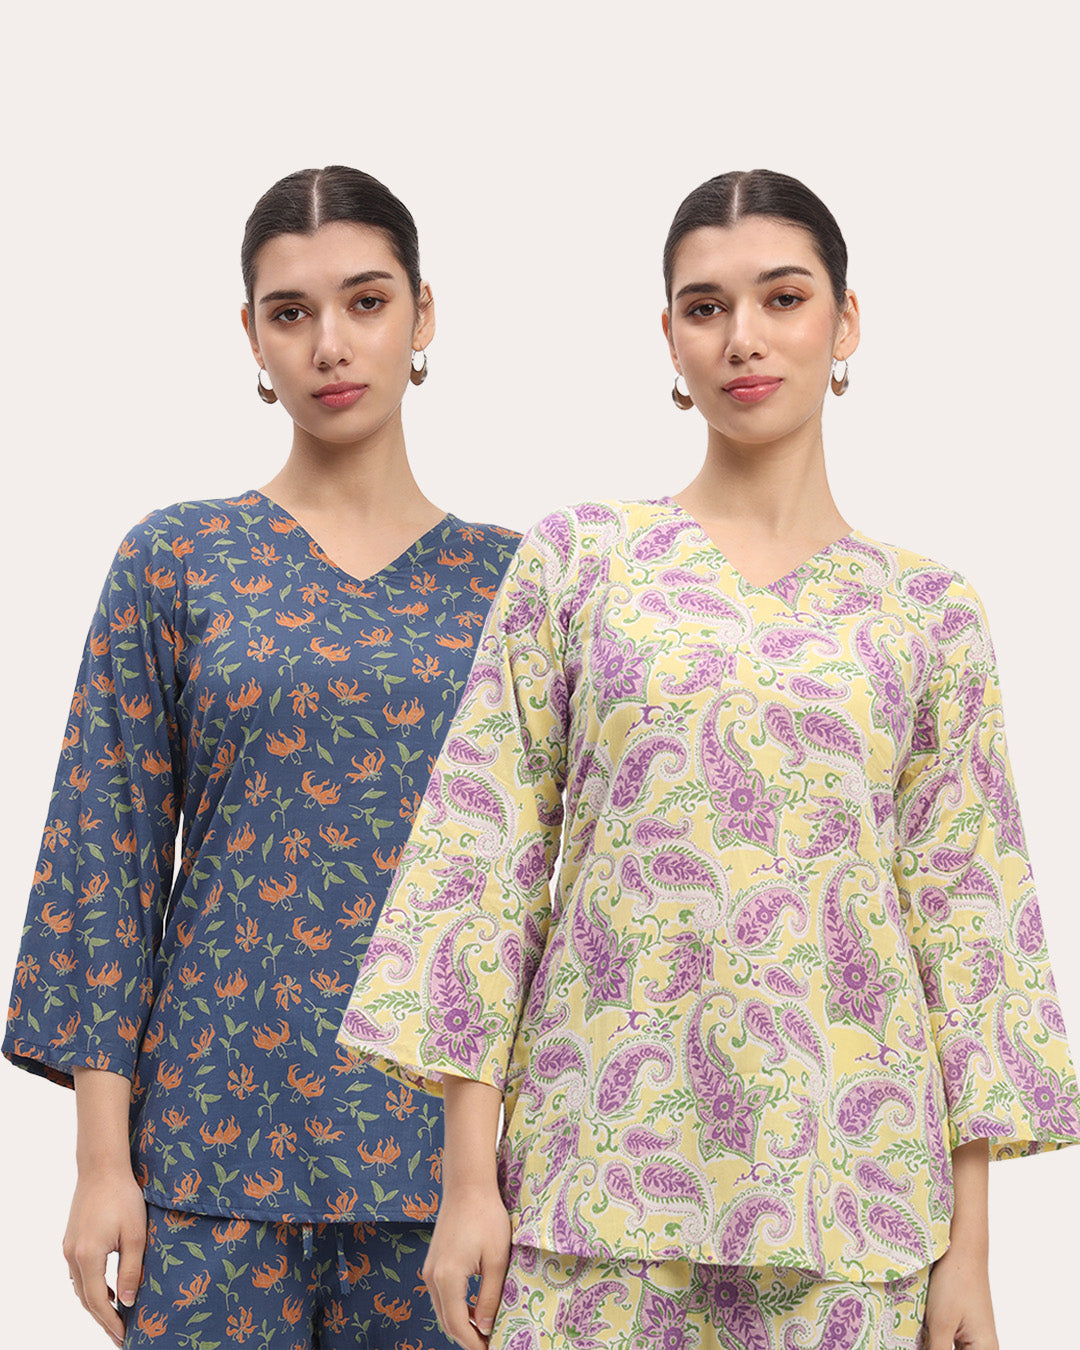 Combo: Fire Lillies & Lavender Paisley V Neck Printed Short Kurta (Without Bottoms)